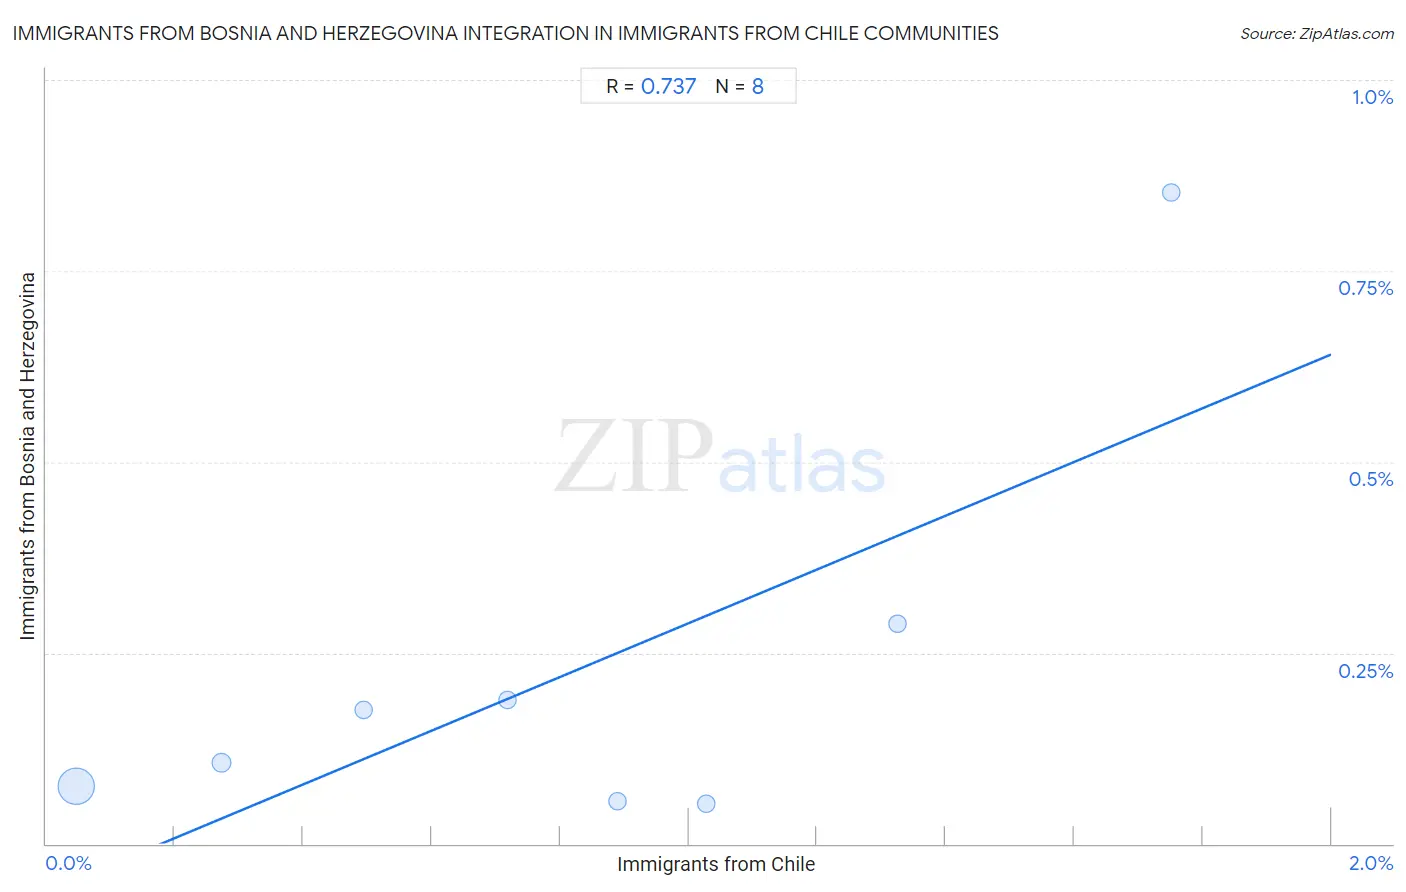 Immigrants from Chile Integration in Immigrants from Bosnia and Herzegovina Communities